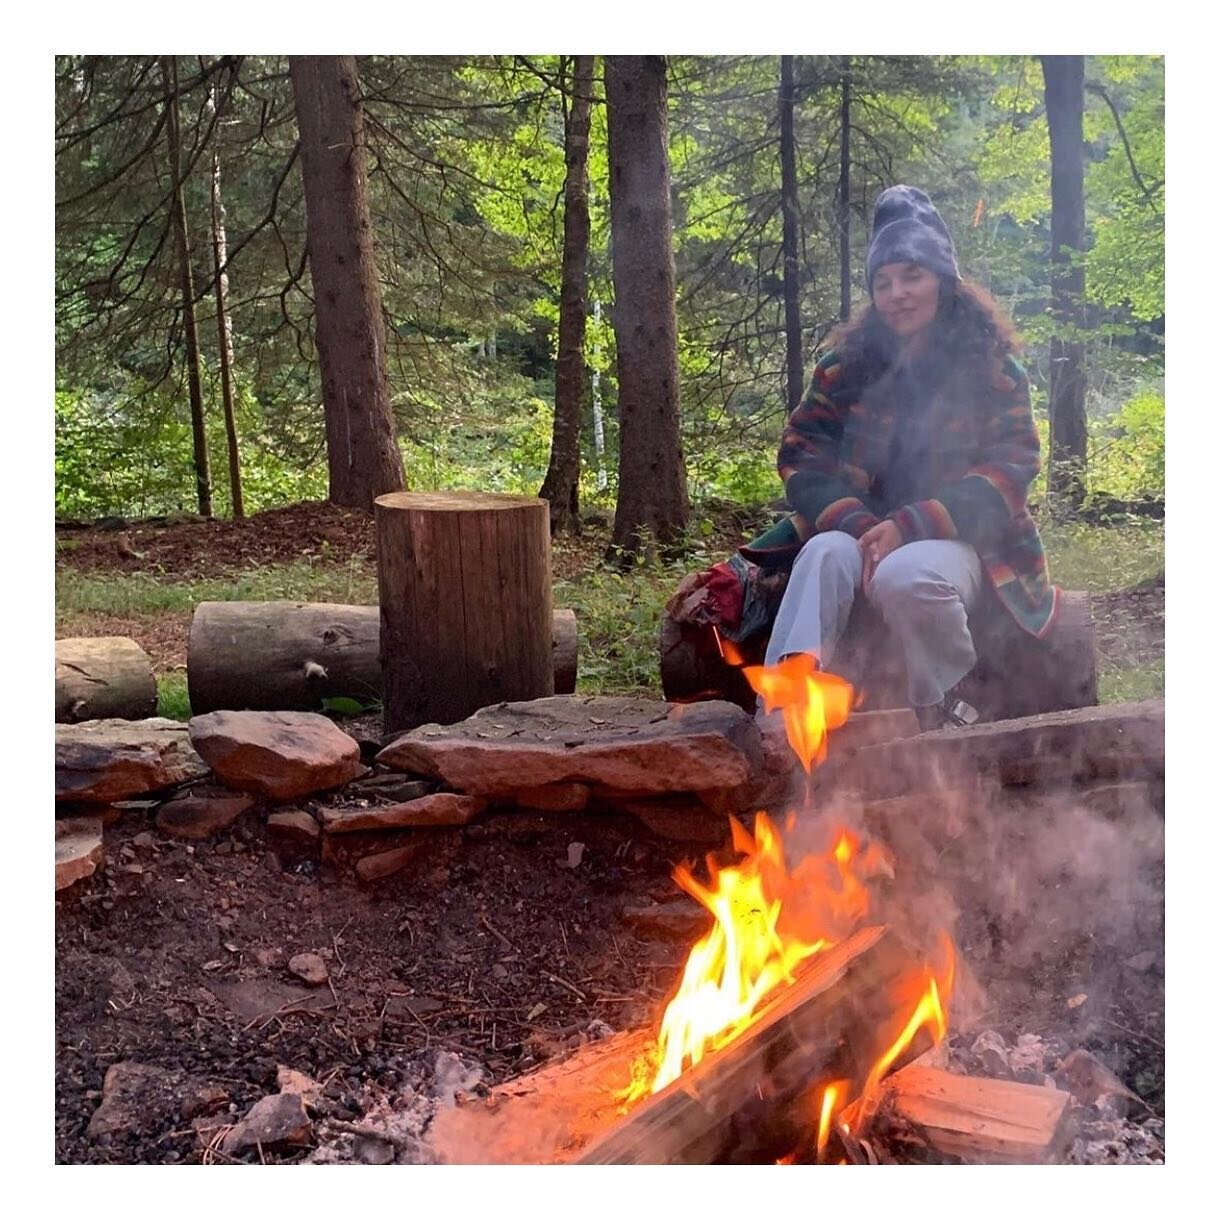 Fall is coming quickly to the Catskills. Perfect time for pit fires and marshmallows.  Paige knows 🧡 
.
.
.
.
#wolfhollowcamp #glamping #catskillgoodness #catskills #airbnb #getoutside #optoutside #findyourselfoutside #glampinglife #glampinghub #esc